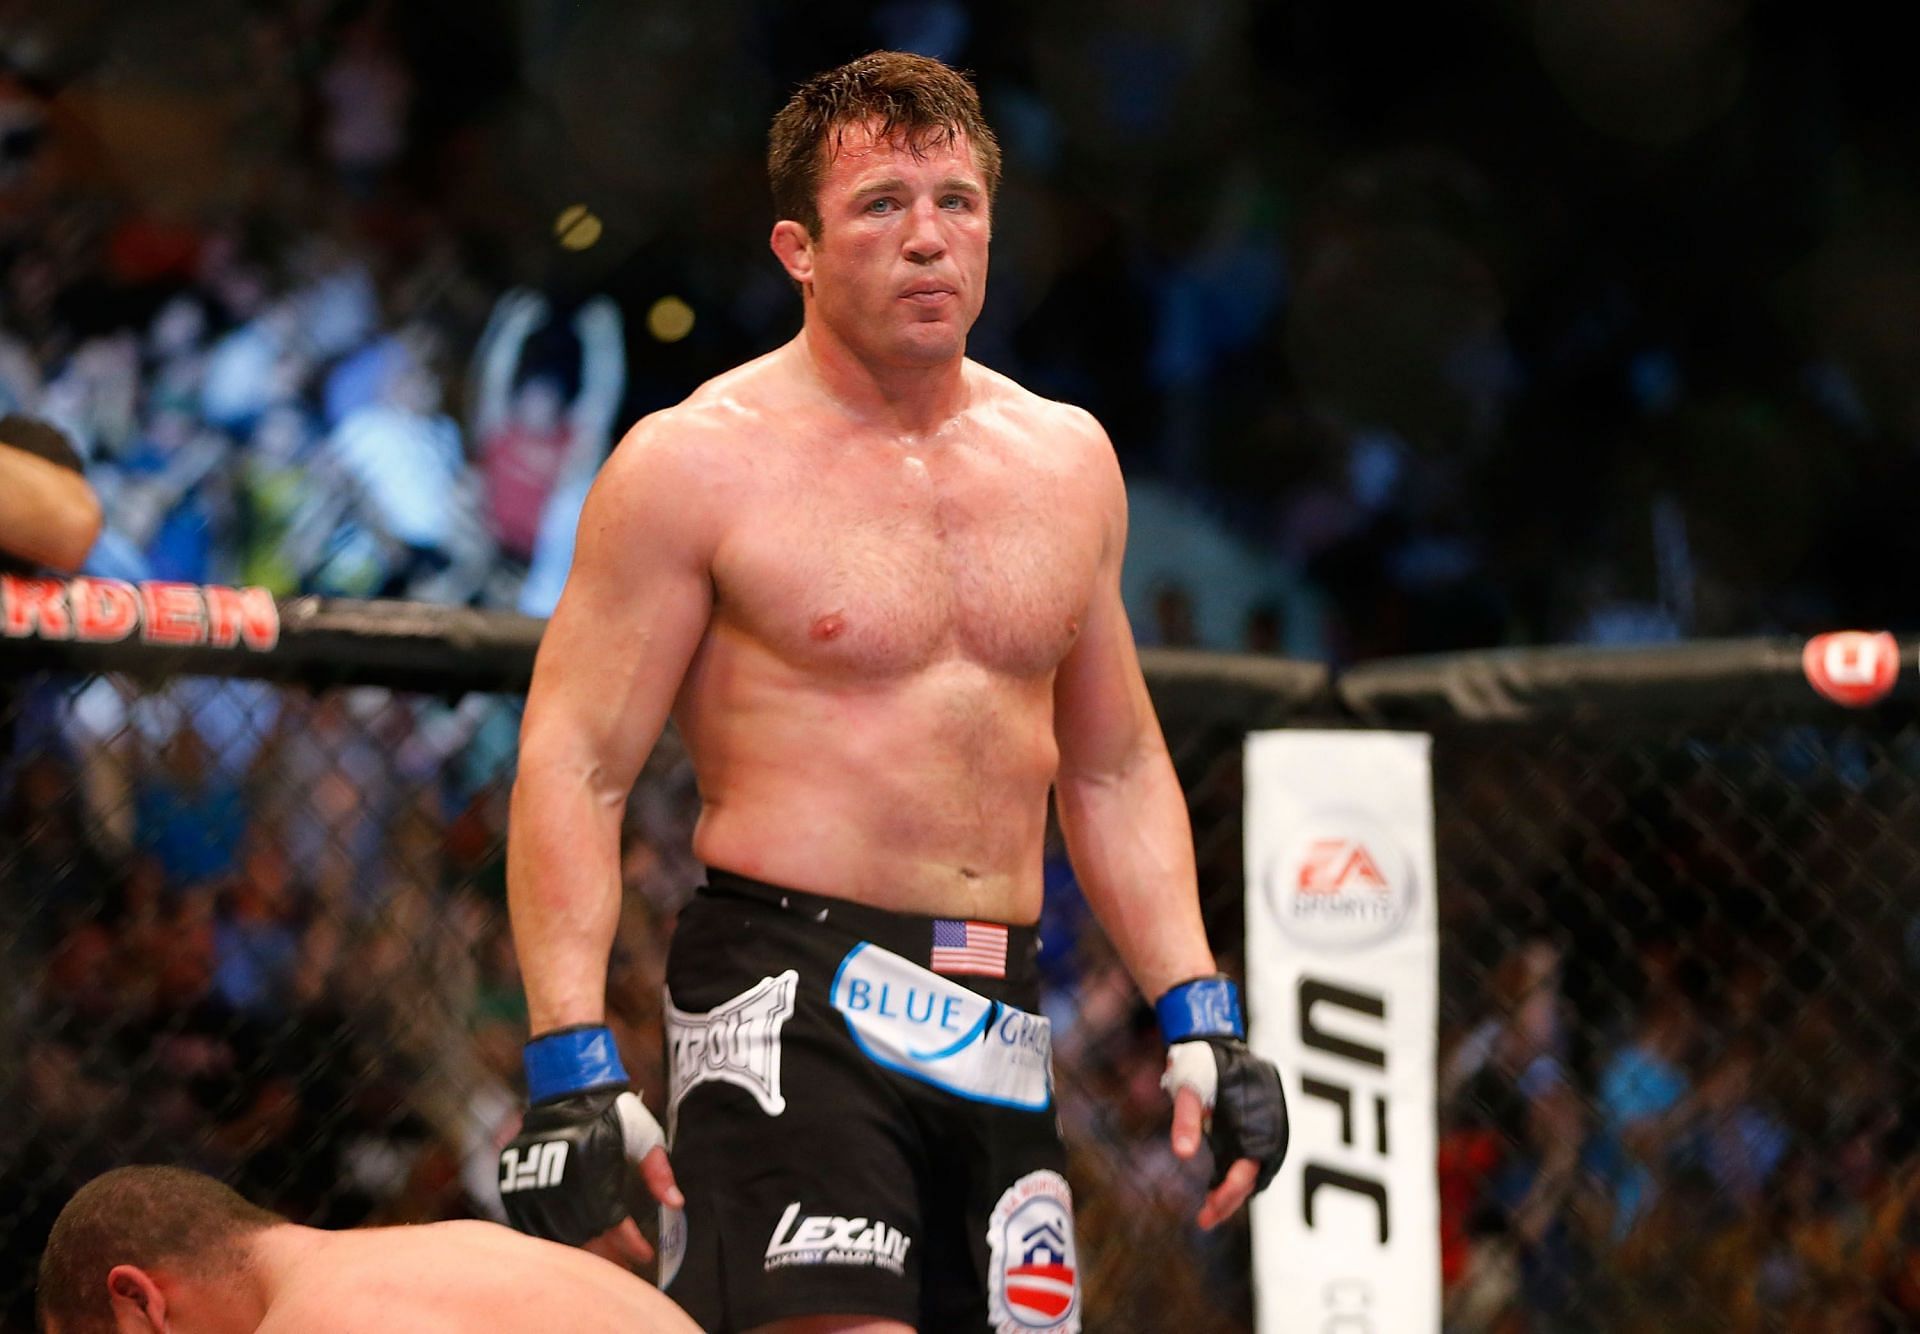 Despite styling himself as &#039;the bad guy&#039;, plenty of fans adored Chael Sonnen